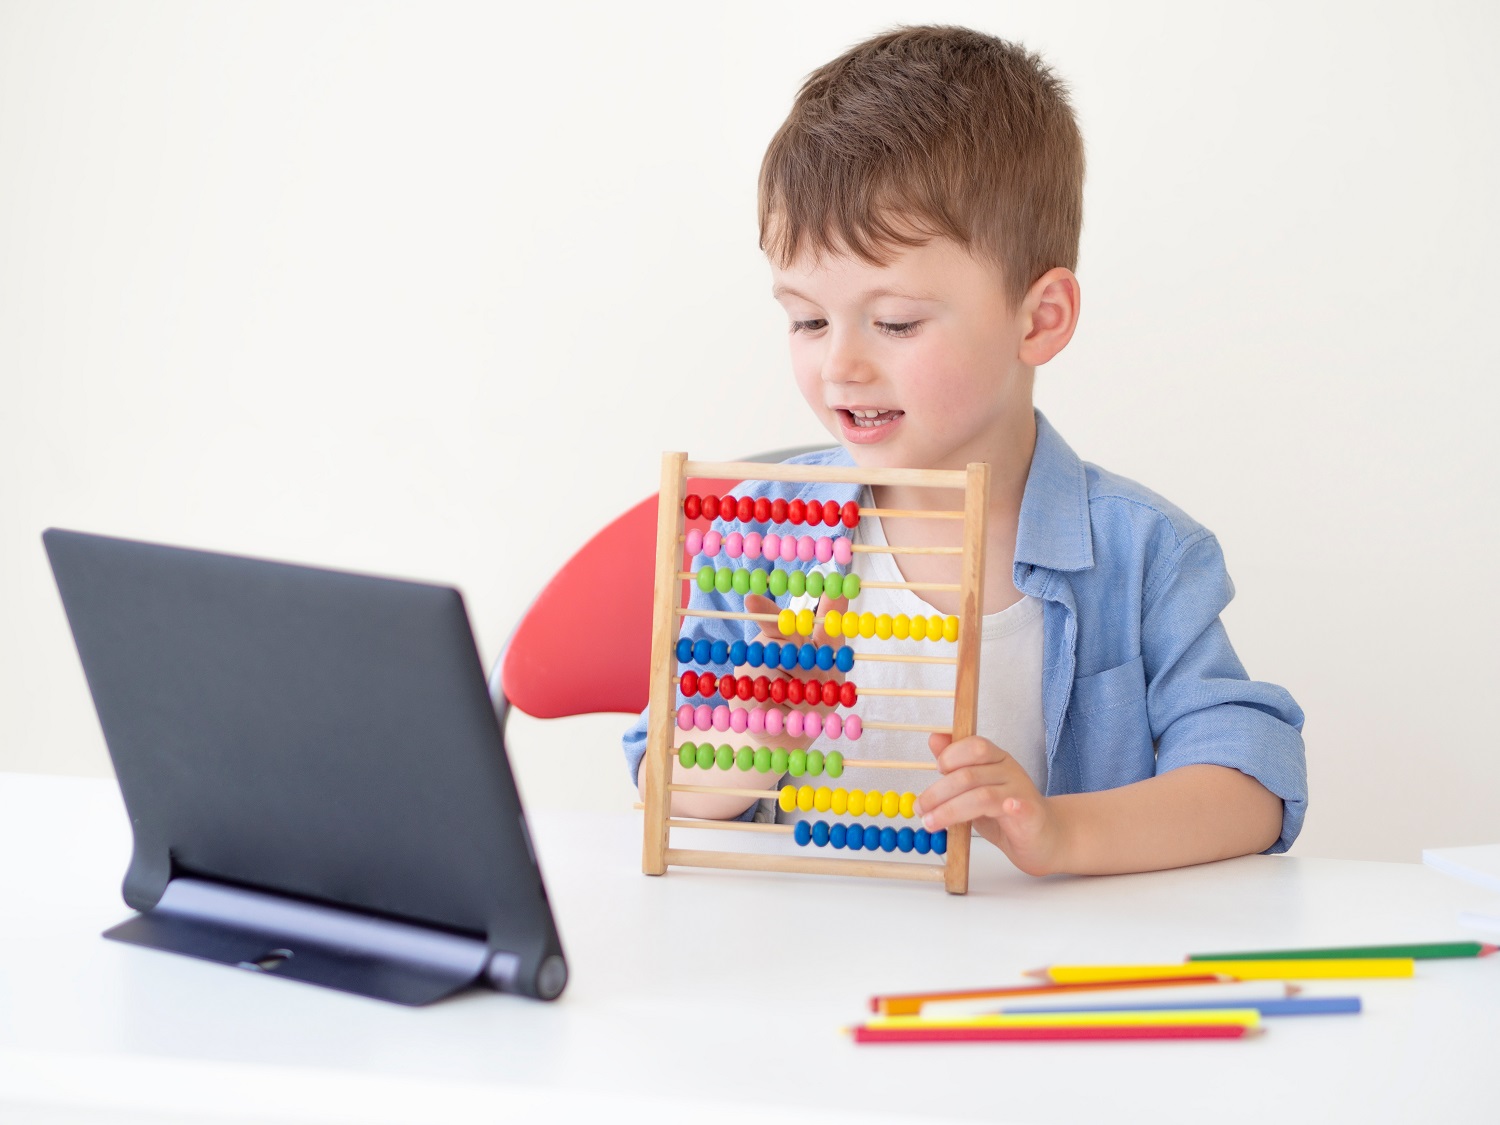 a child playing with an abacus in front of a tablet